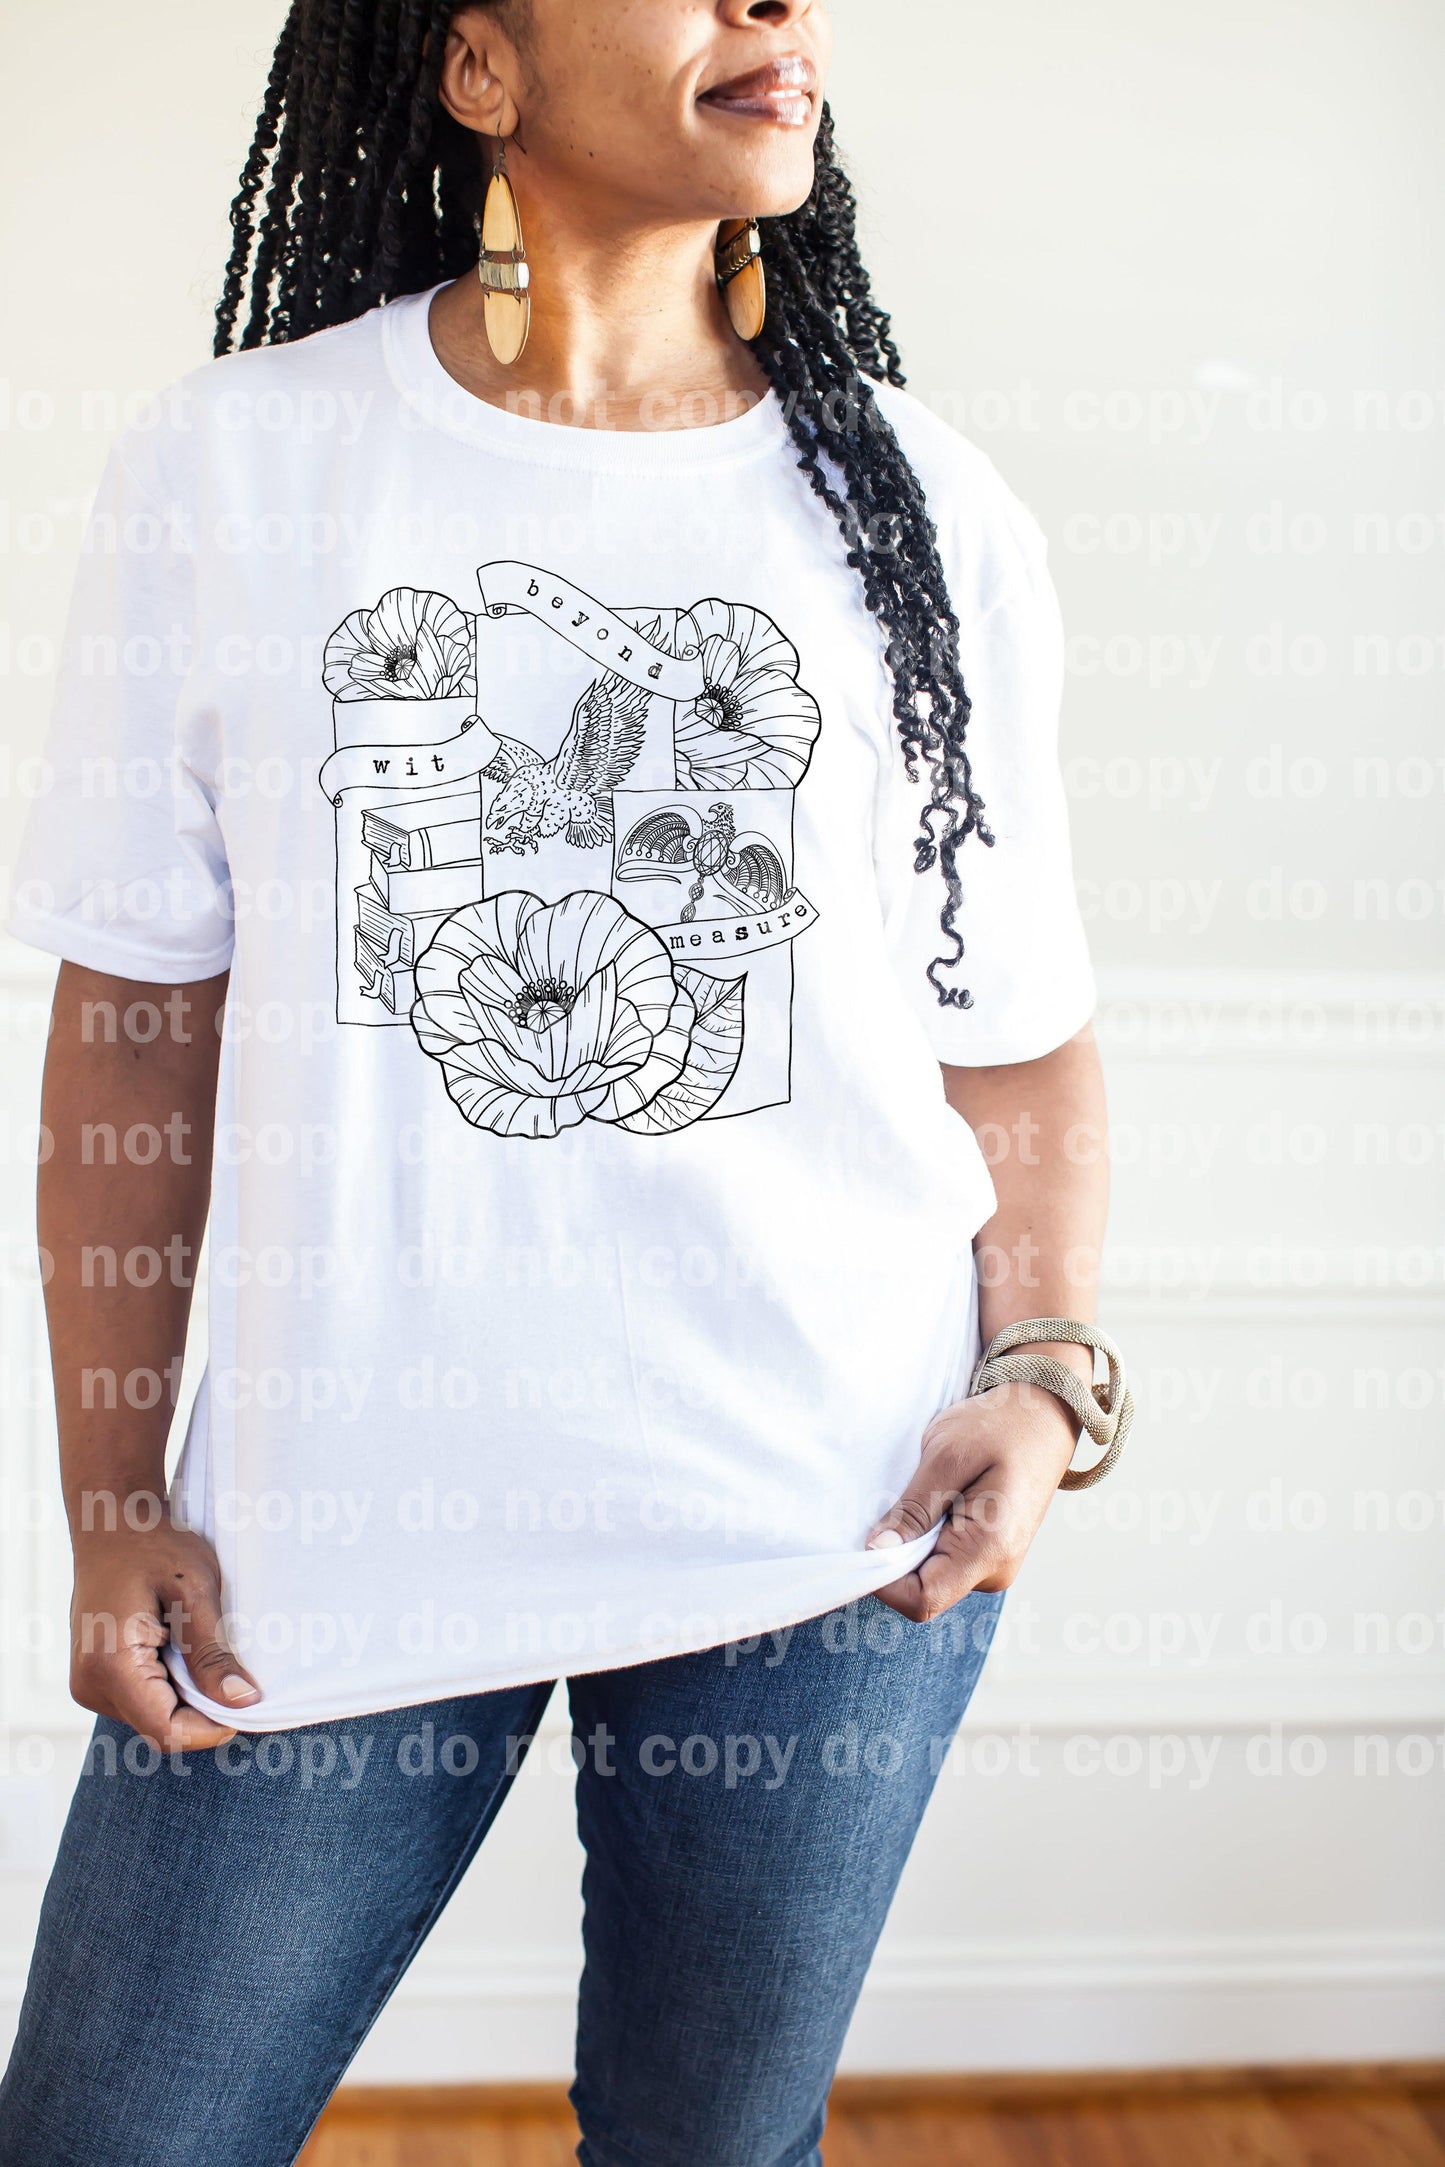 Beyond Wit Measure Full Color/One Color Dream Print or Sublimation Print